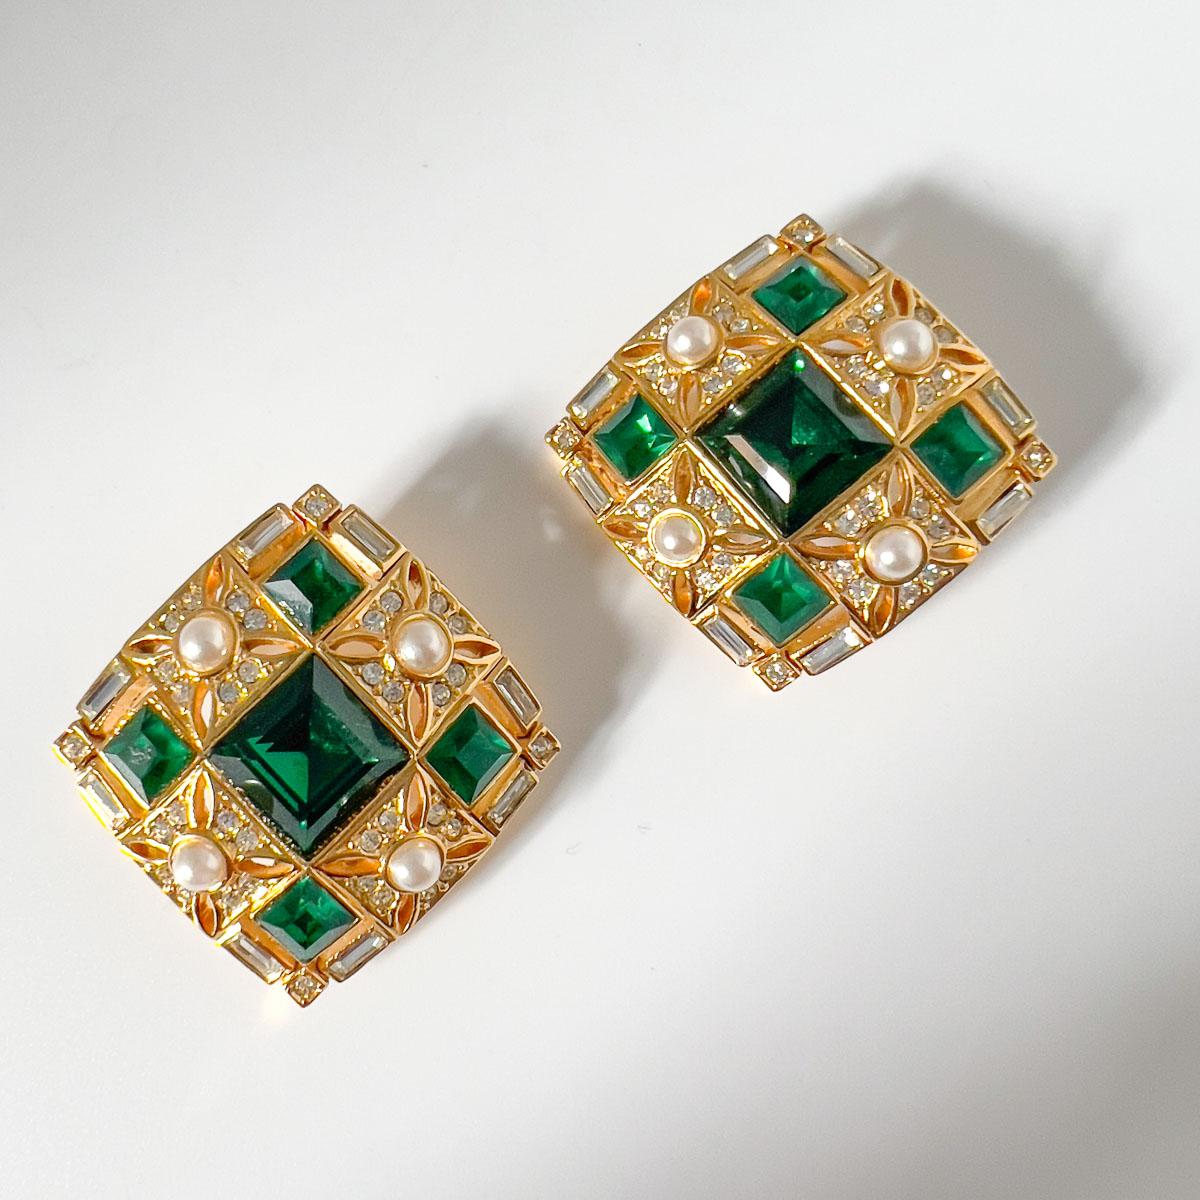 A spectacular pair of Vintage Emerald Crystal Earrings. Grand and luxurious with square cut emerald crystal stones and pearl accents these timeless clips will take your style to new heights.
An unsigned beauty. A rare treasure. Just because a jewel